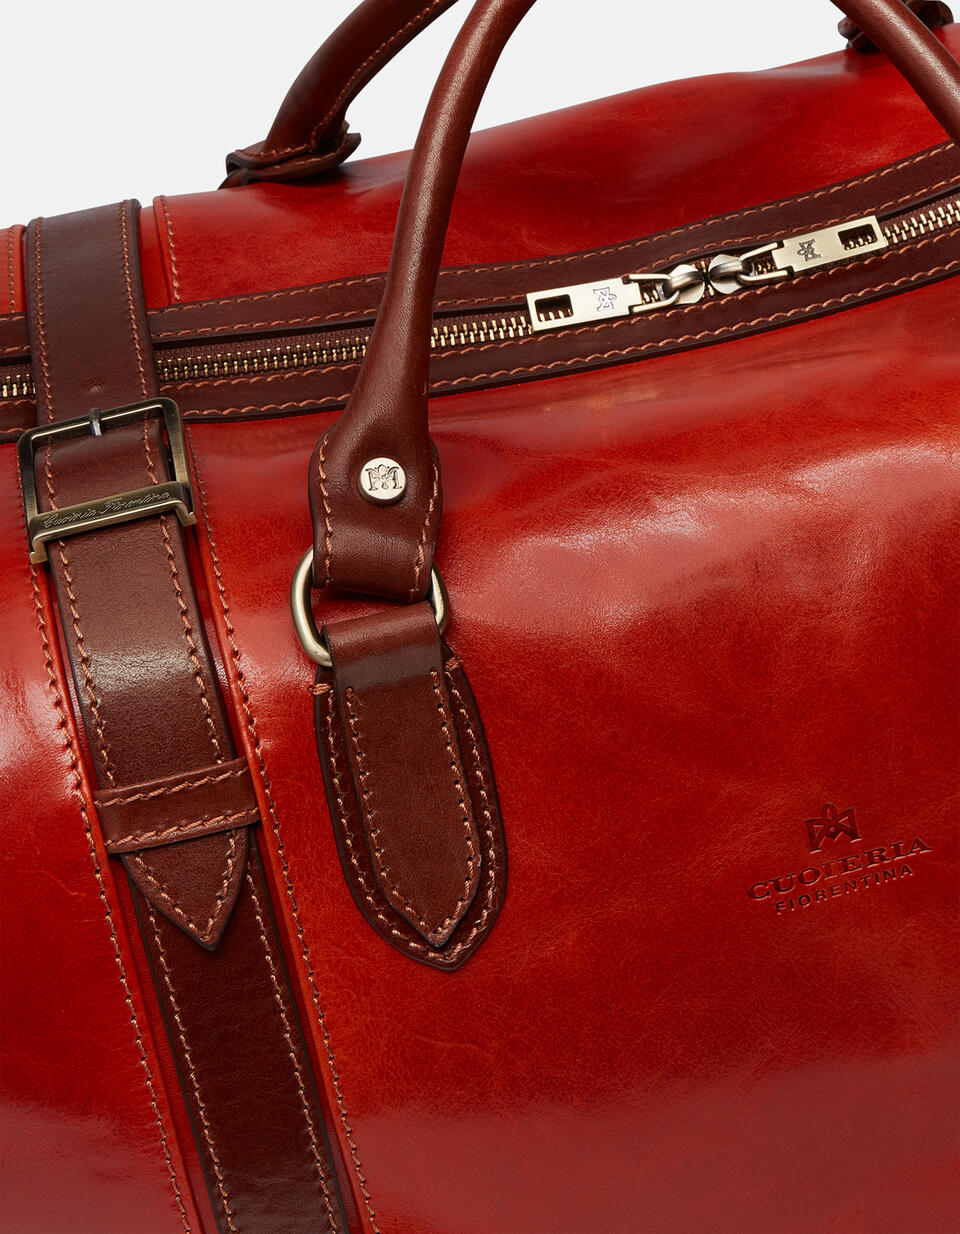 Leather travel bag with two handles - Luggage | TRAVEL BAGS ARANCIOBICOLORE - Luggage | TRAVEL BAGSCuoieria Fiorentina